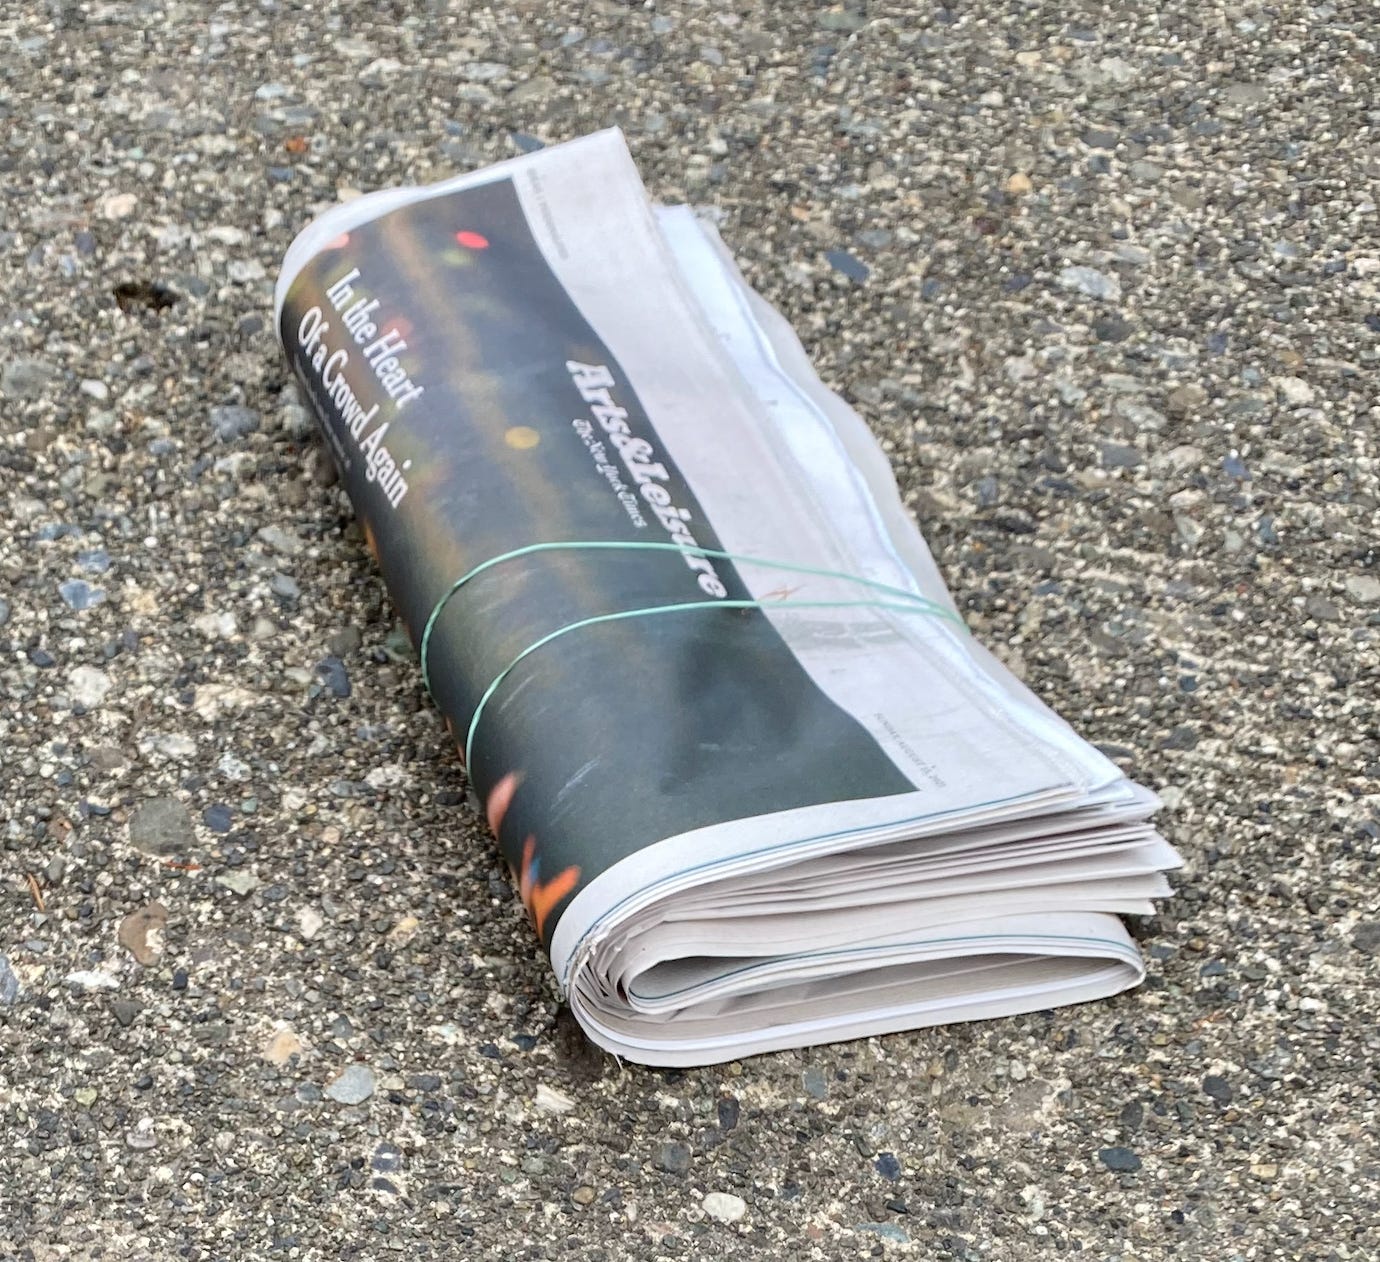 The Sunday New York Times on a Clyde Hill driveway. Photo credit: Joan Morse